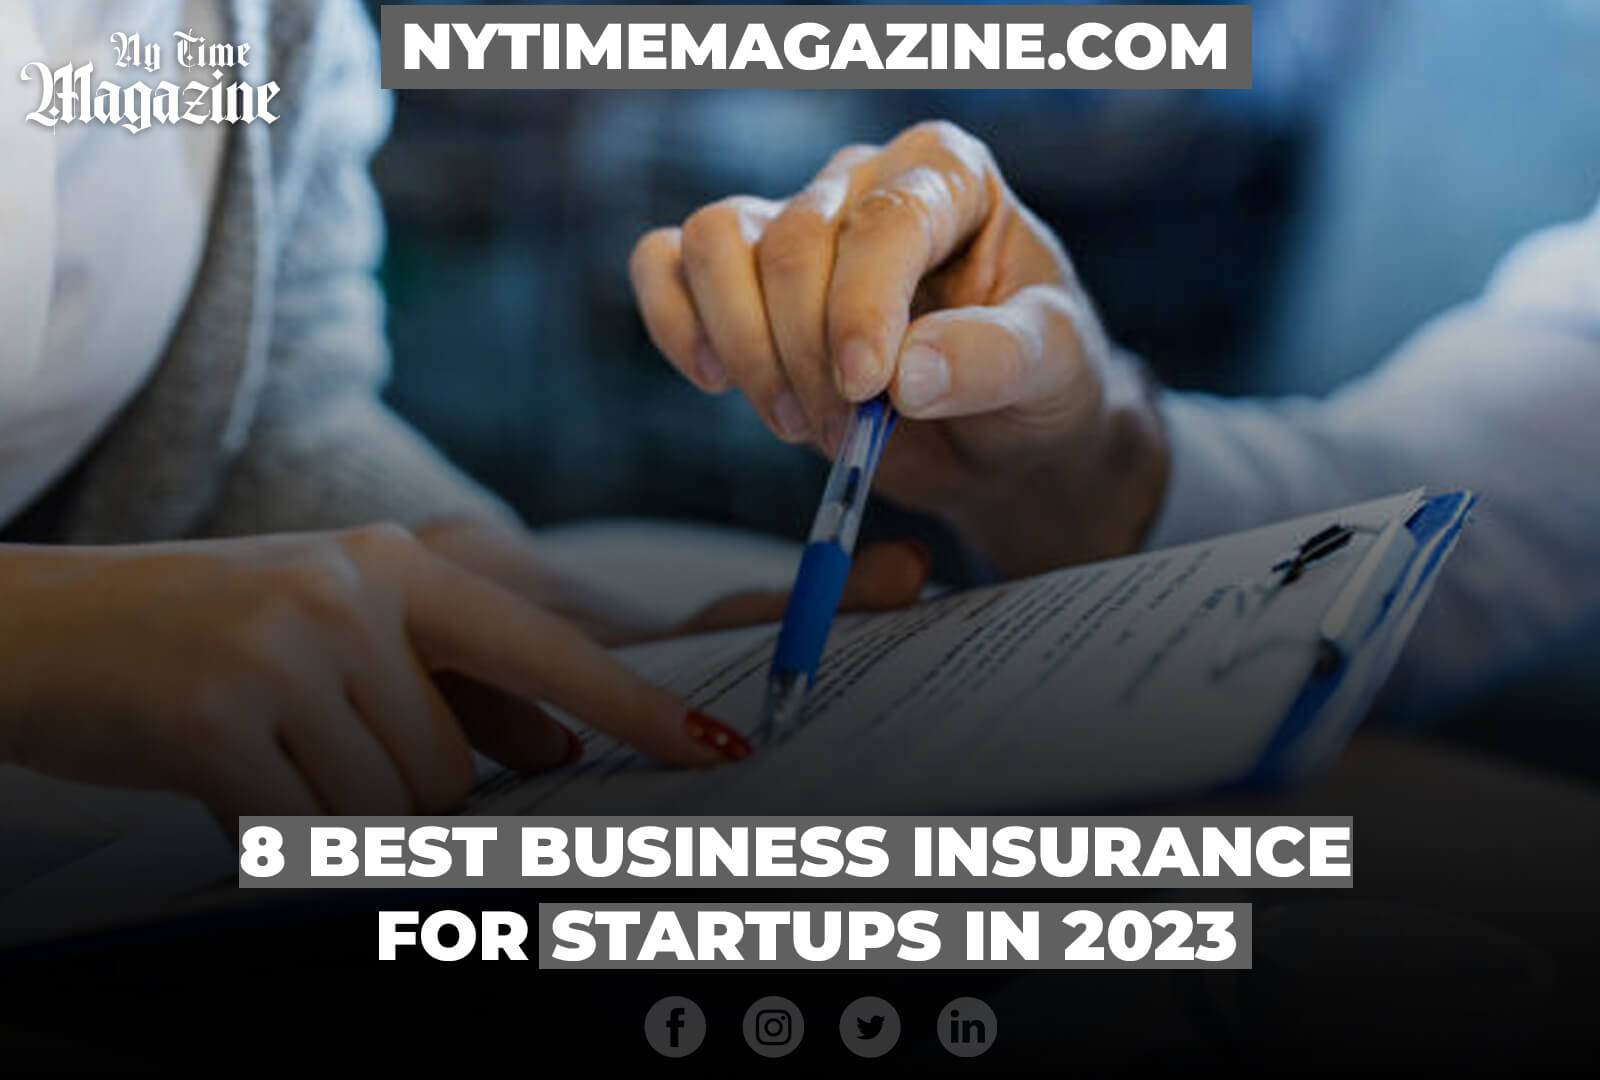 8 Best Business Insurance for Startups in 2023